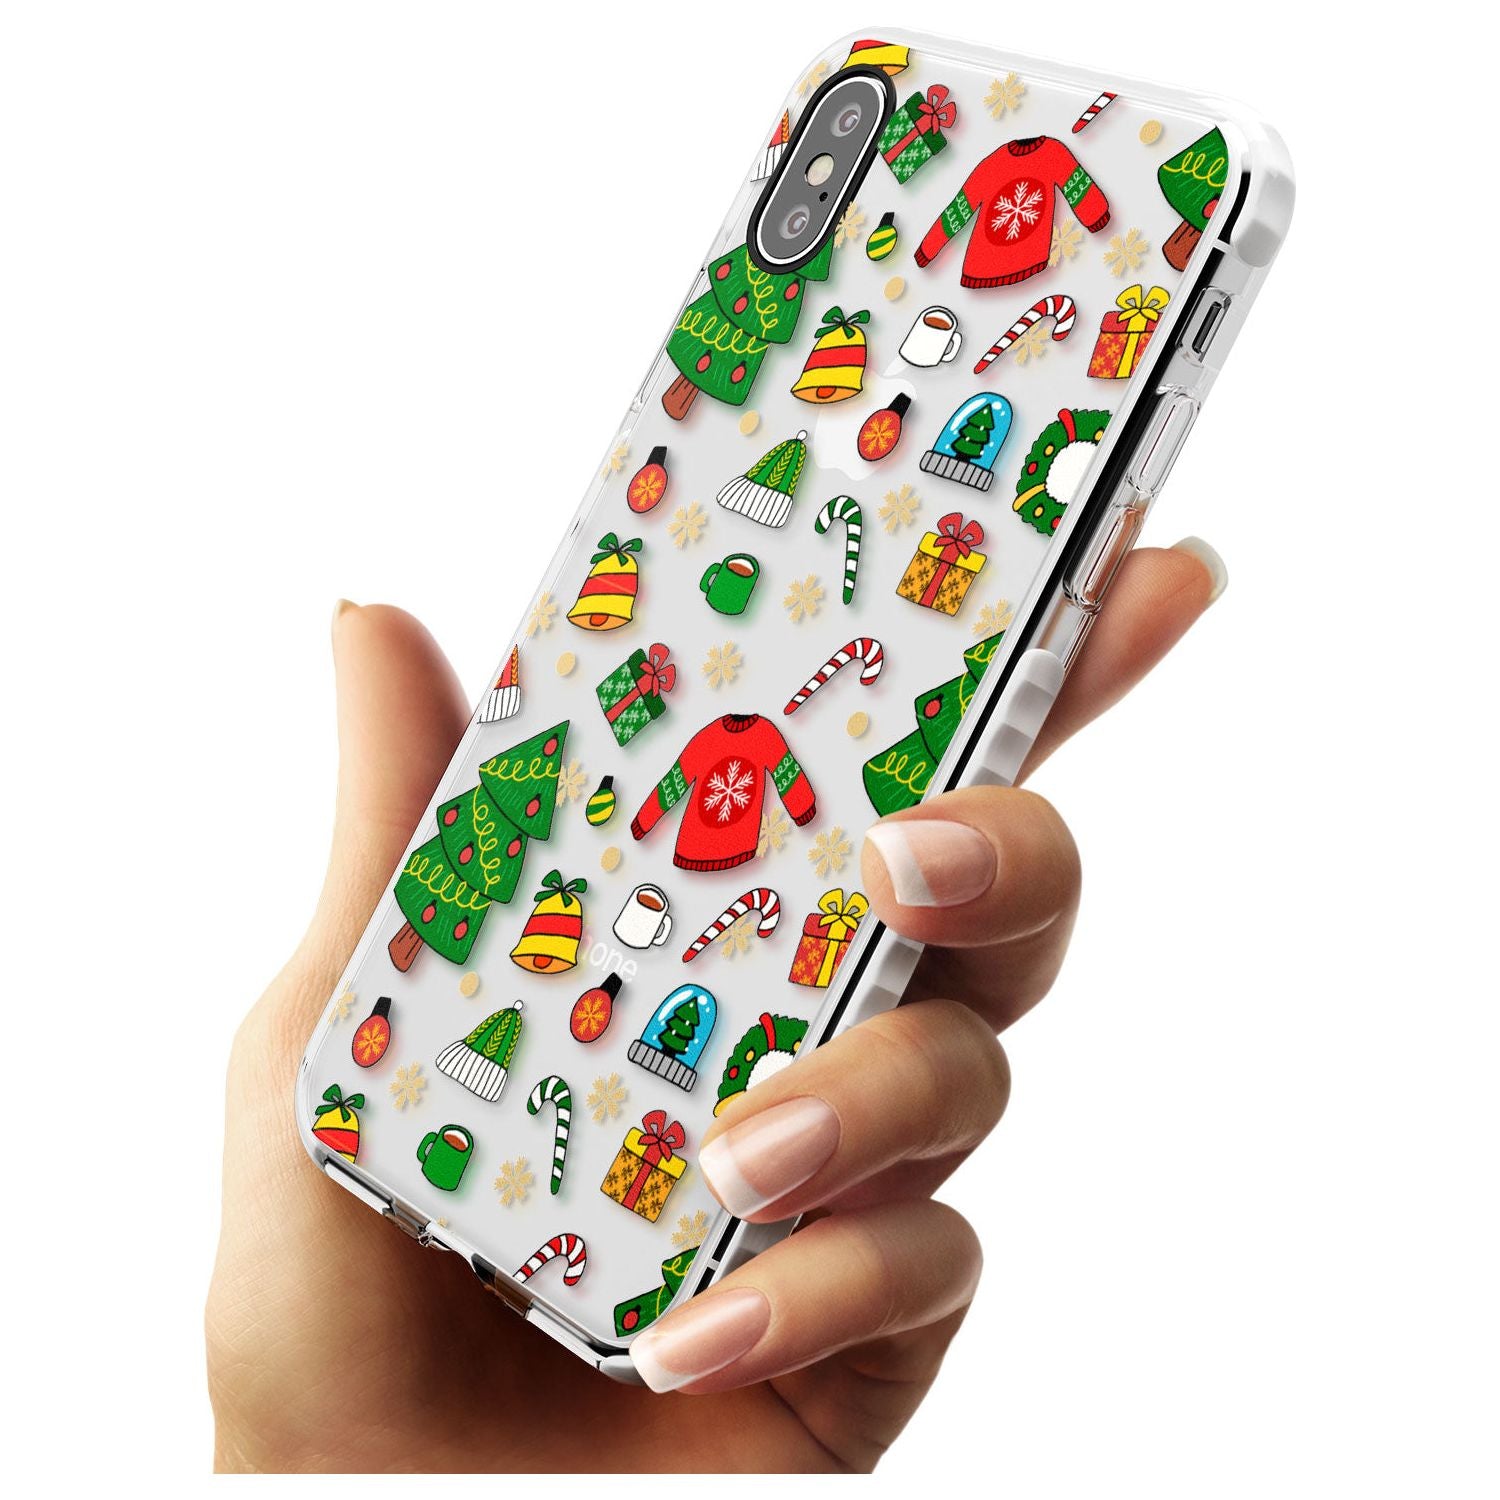 Christmas Mixture Pattern Impact Phone Case for iPhone X XS Max XR